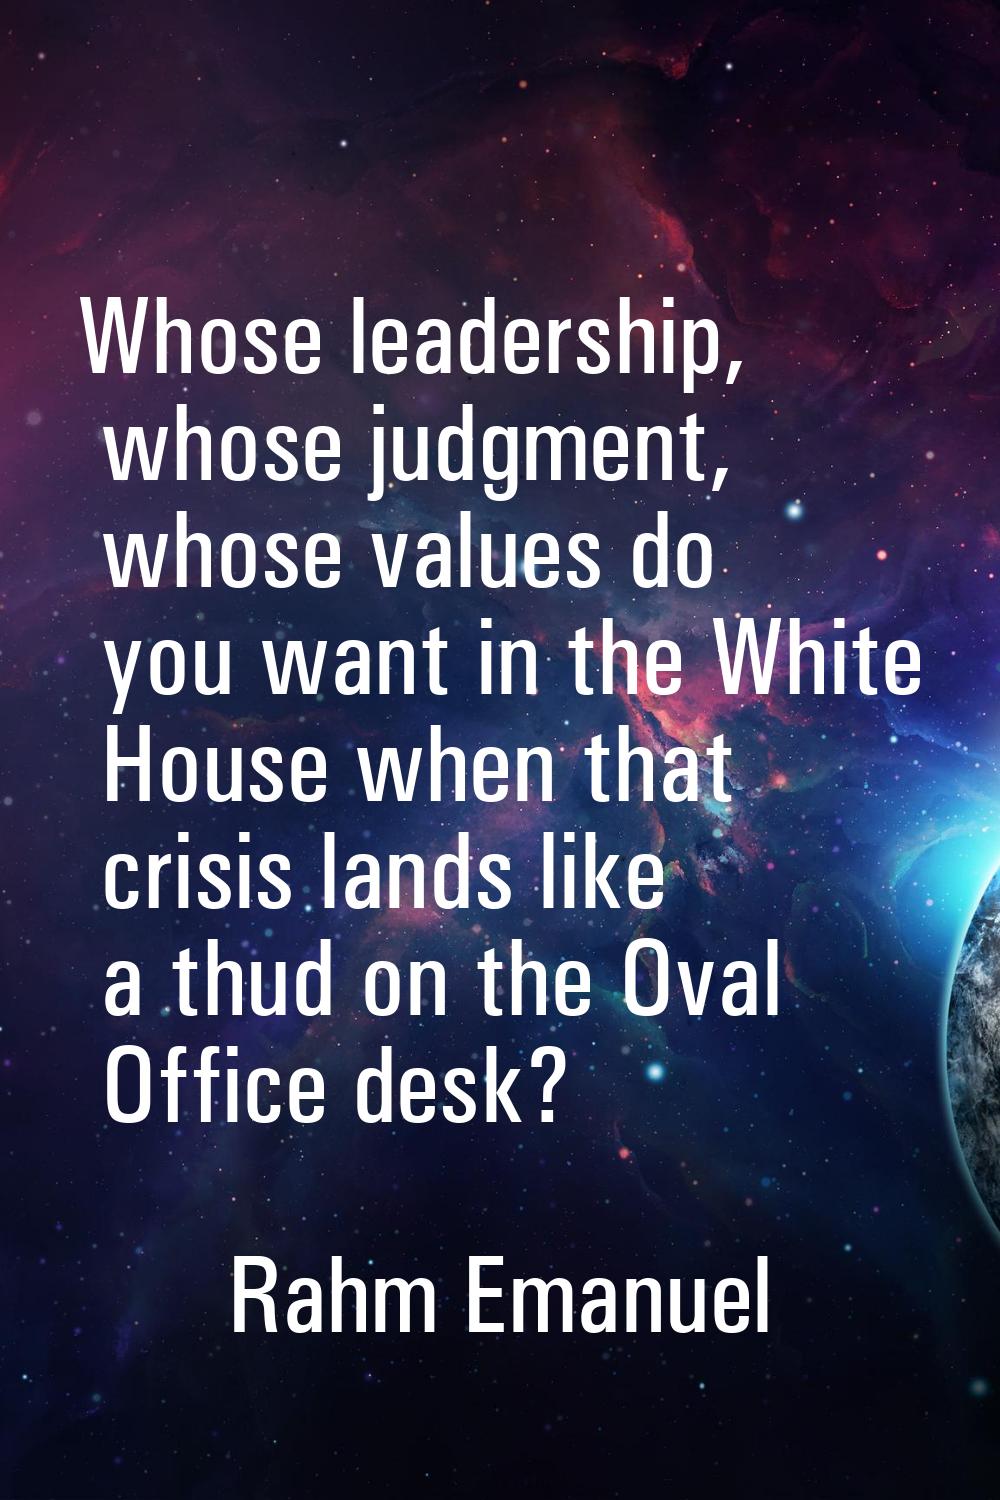 Whose leadership, whose judgment, whose values do you want in the White House when that crisis land